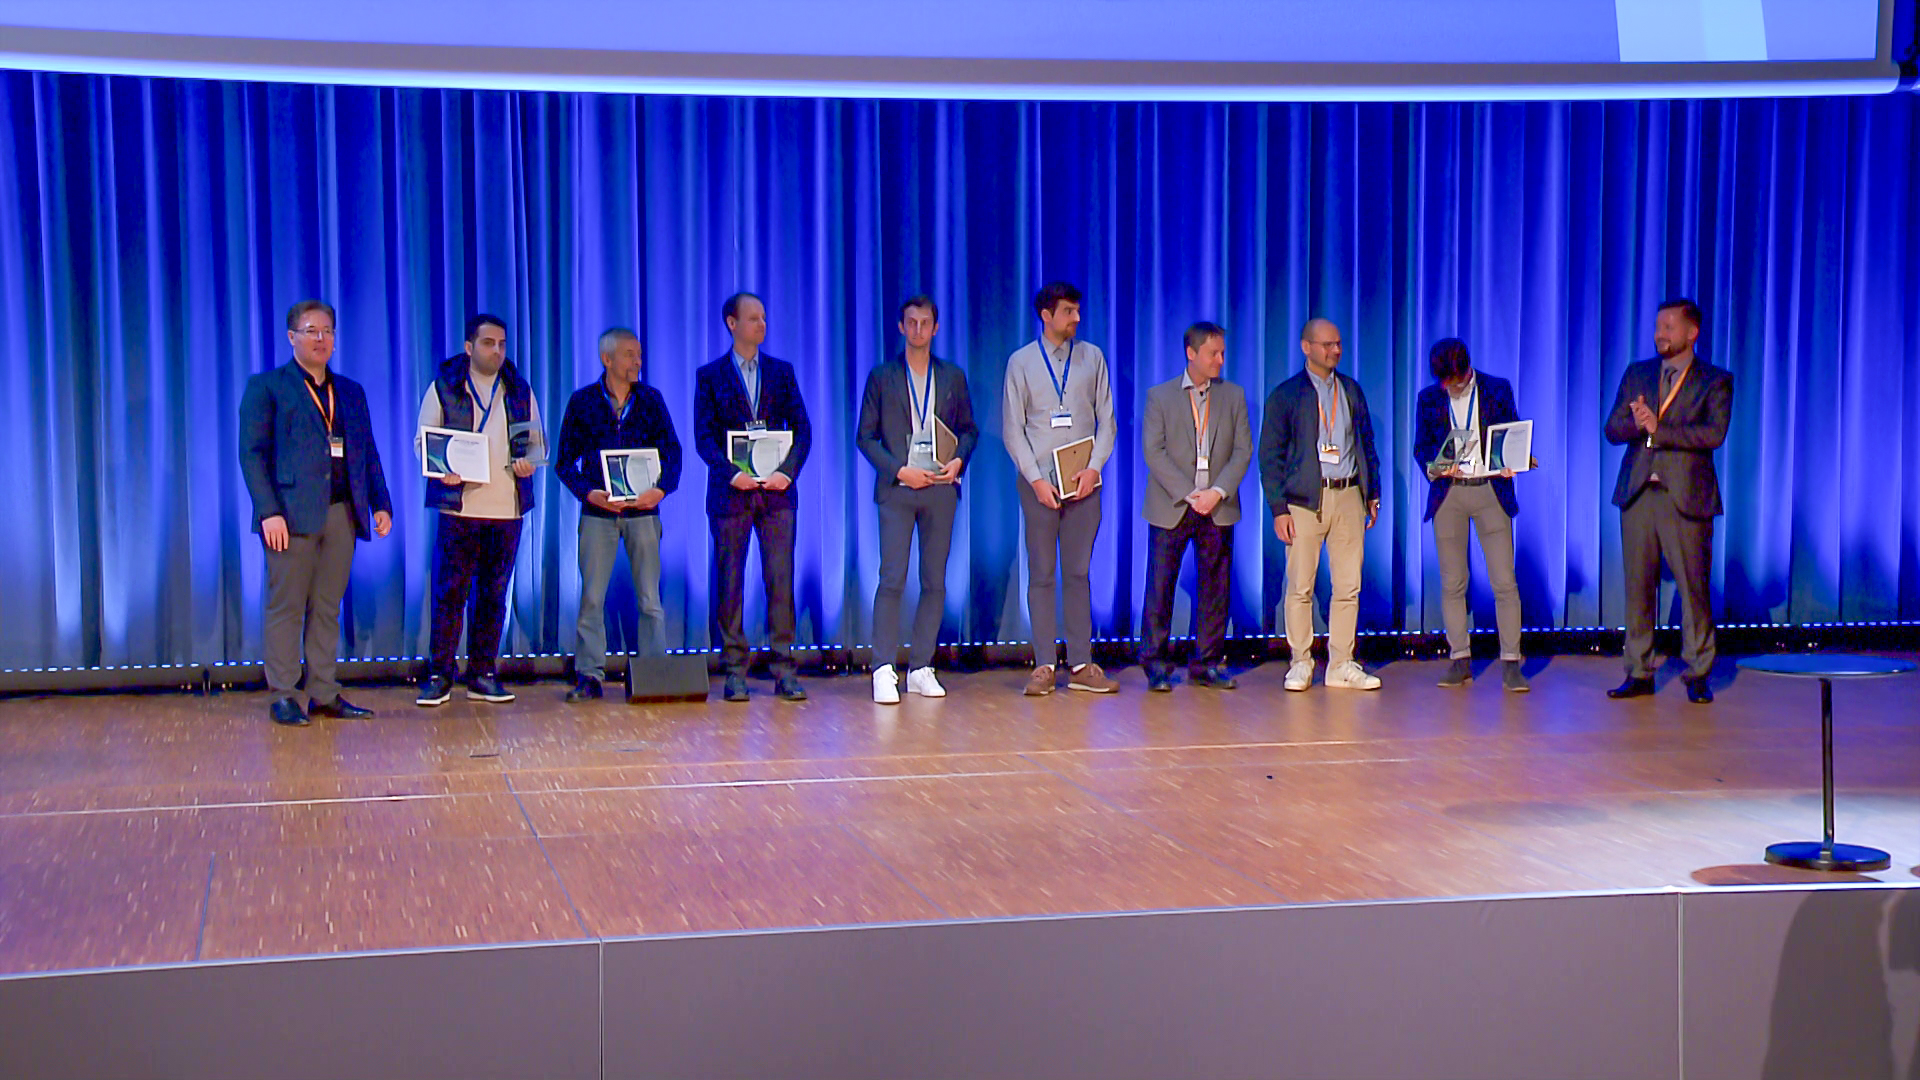 A photograph of the Best Paper and Best Poster award winners from the COMSOL Conference 2023 Munich.